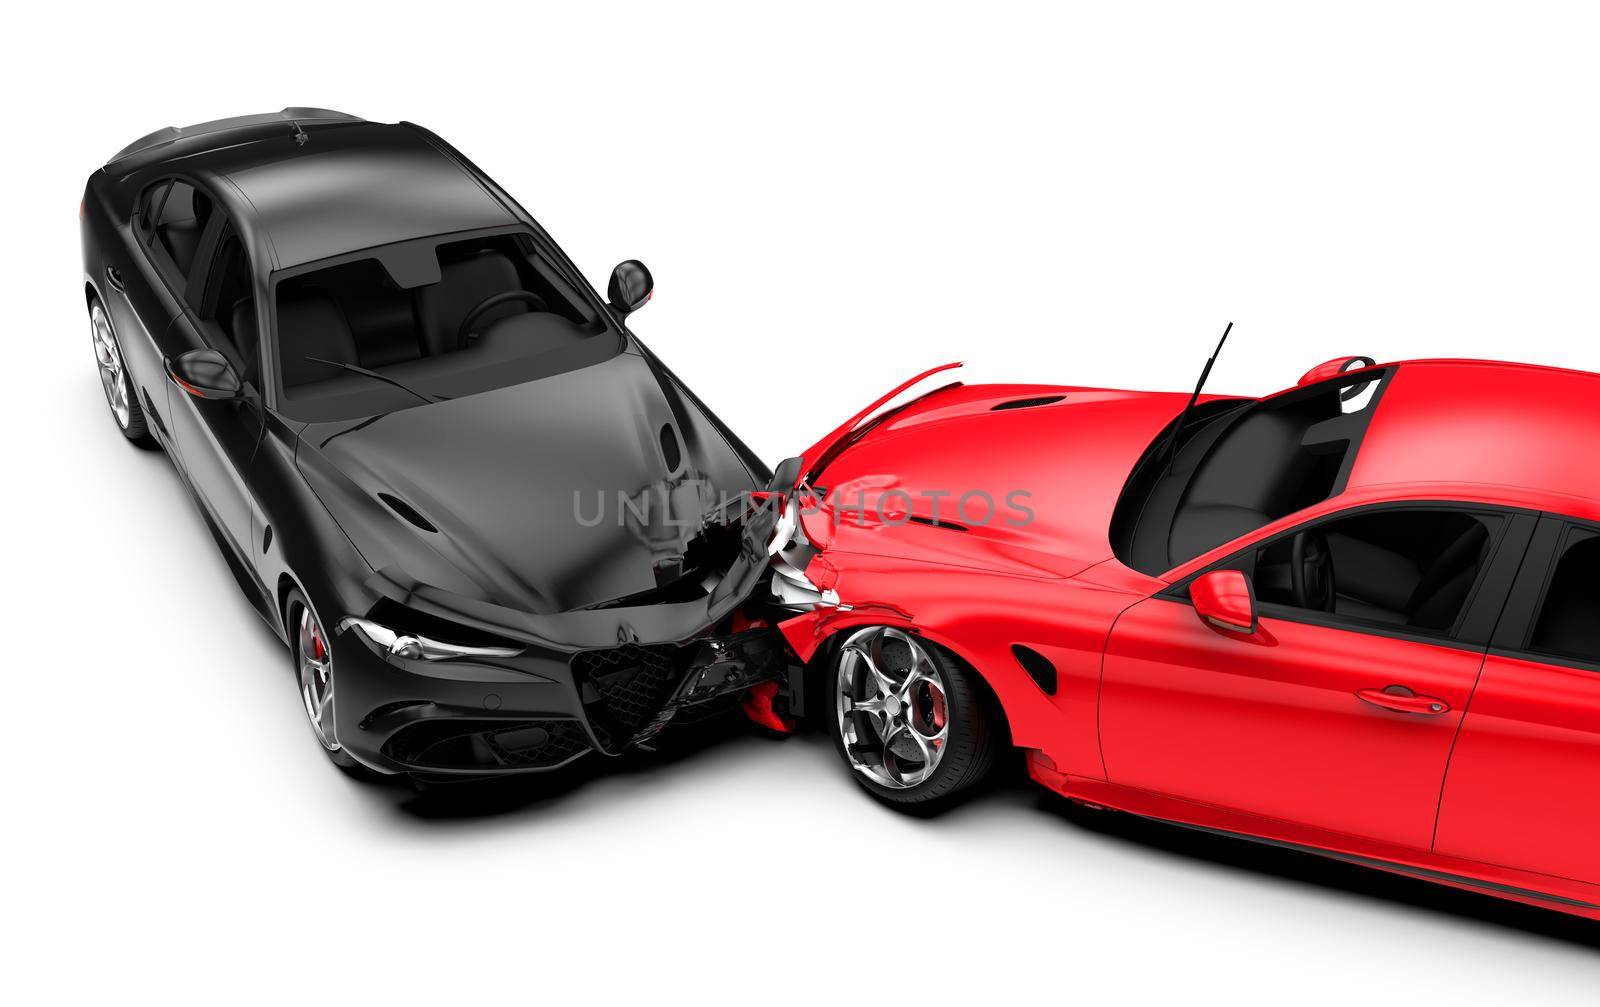 Accident between two cars, one red and one black, isolated on white, top view by cla78